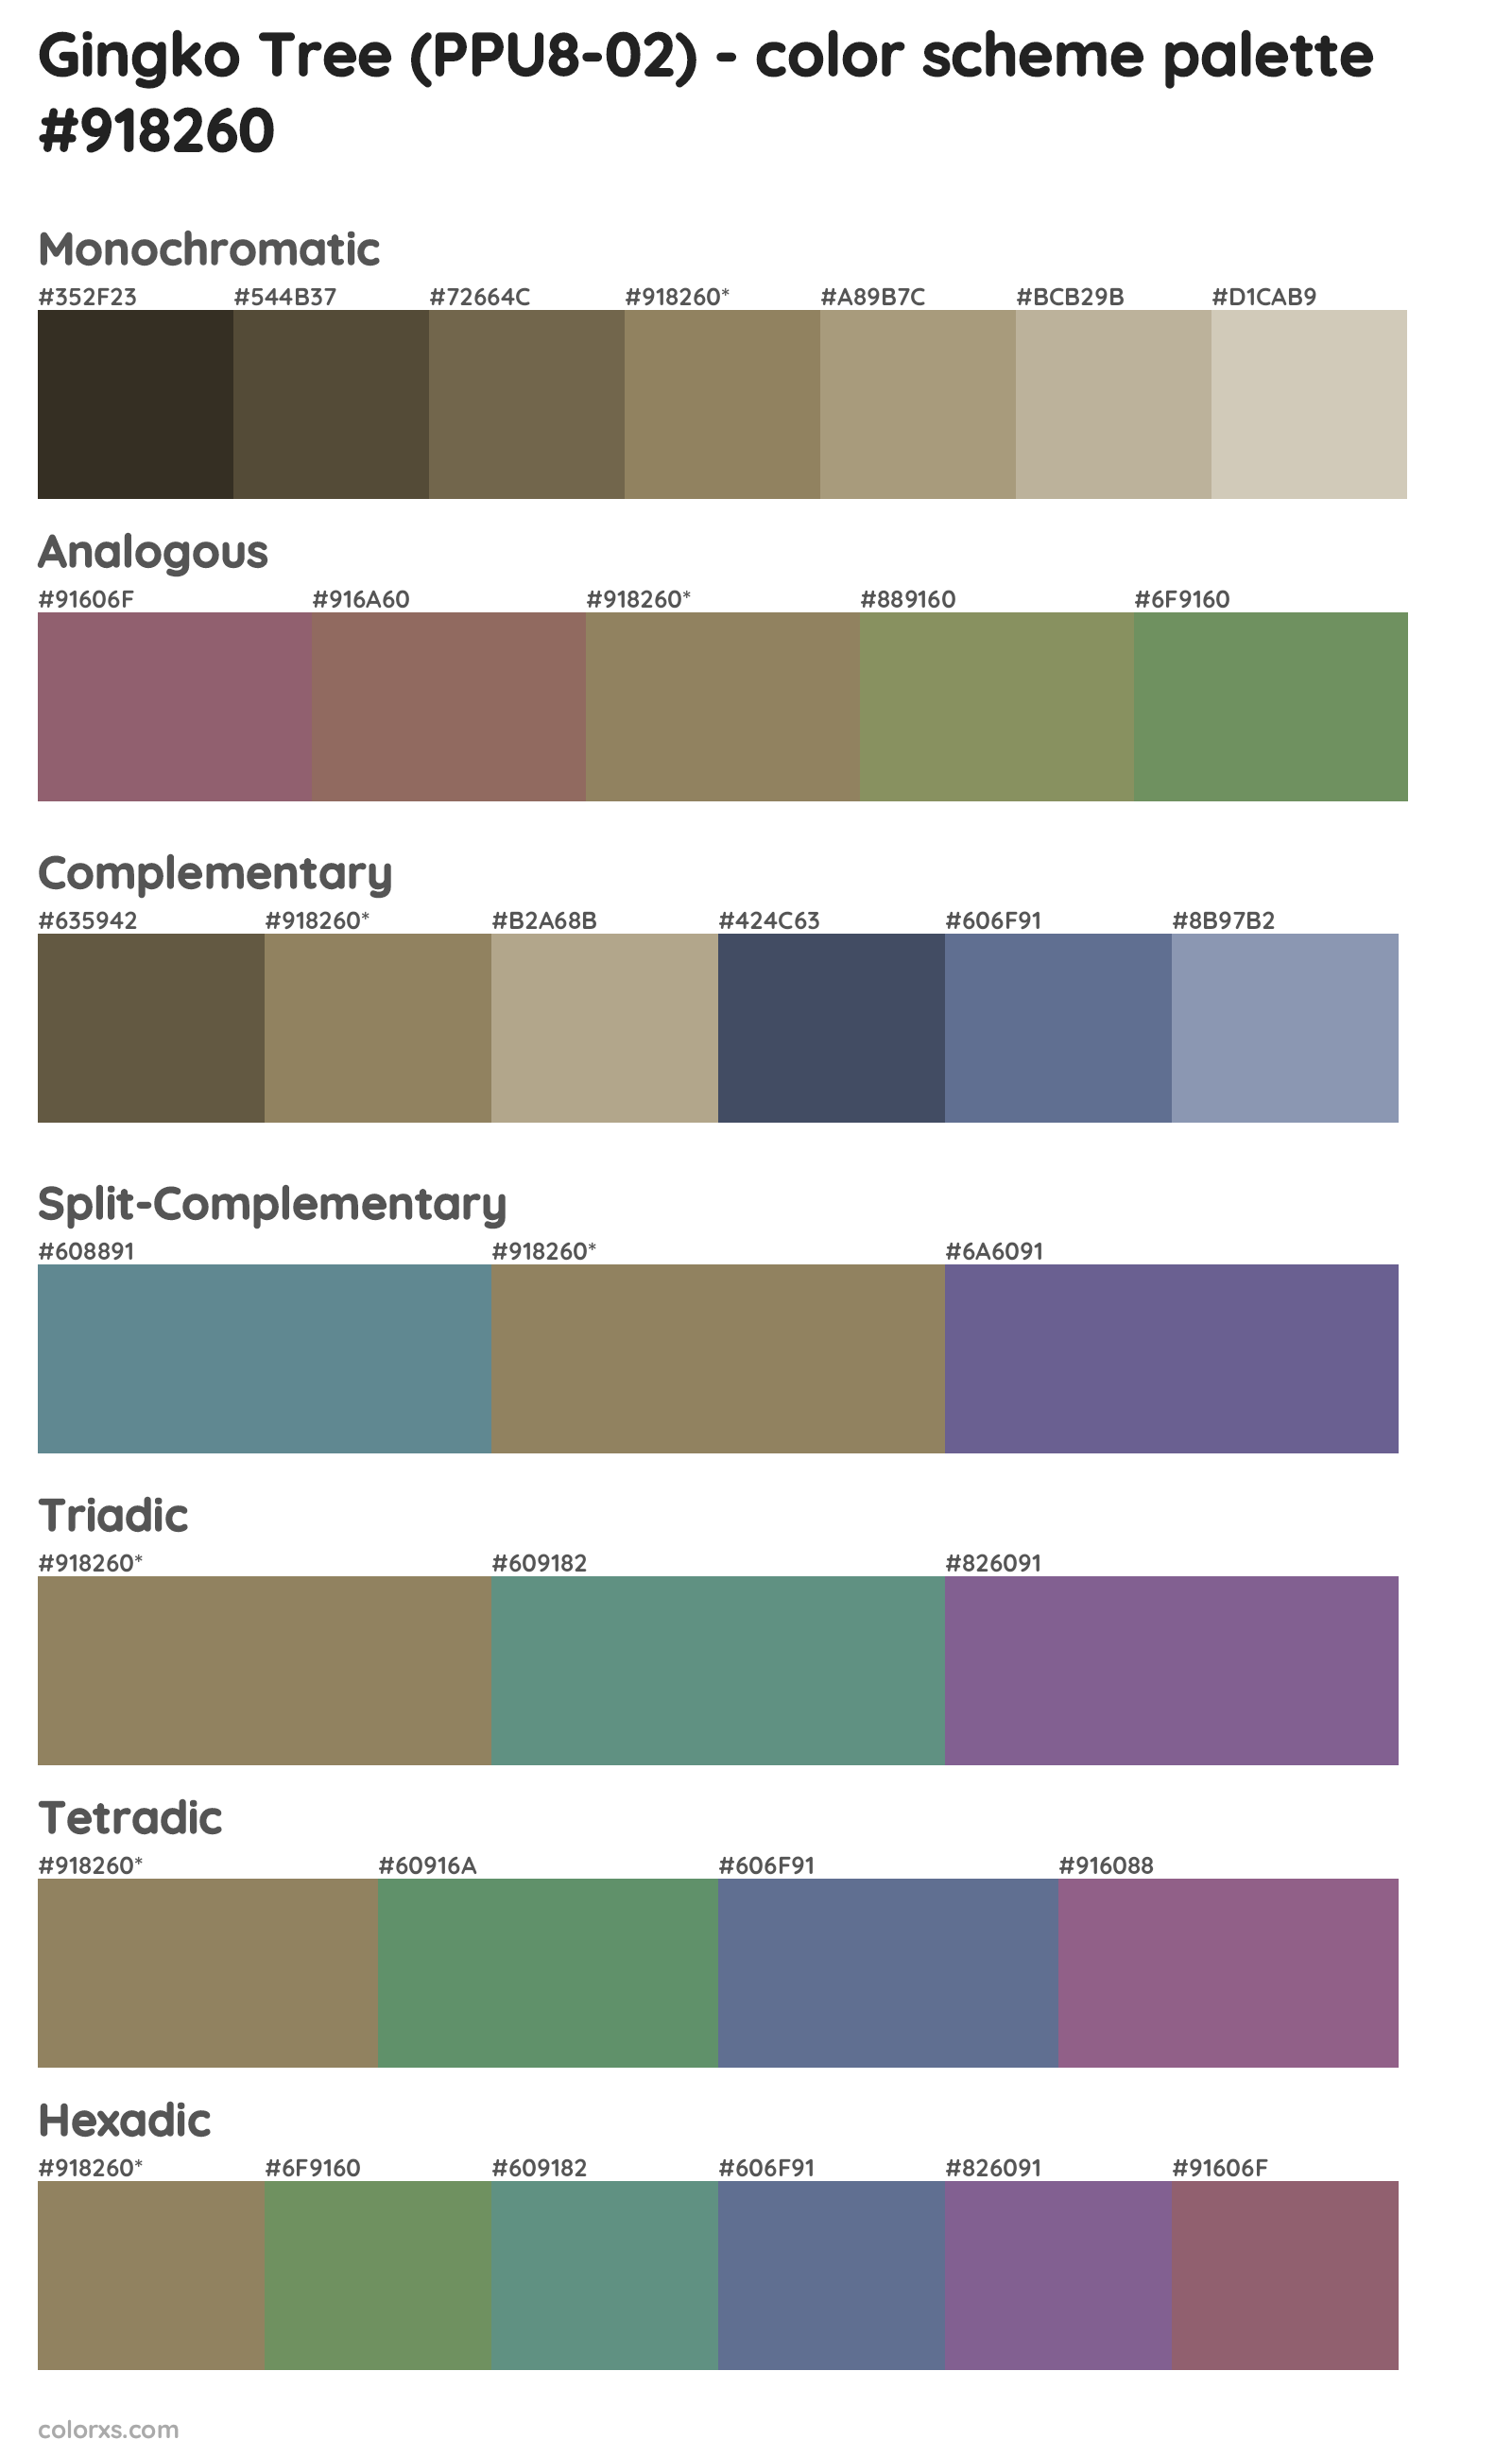 Gingko Tree (PPU8-02) Color Scheme Palettes